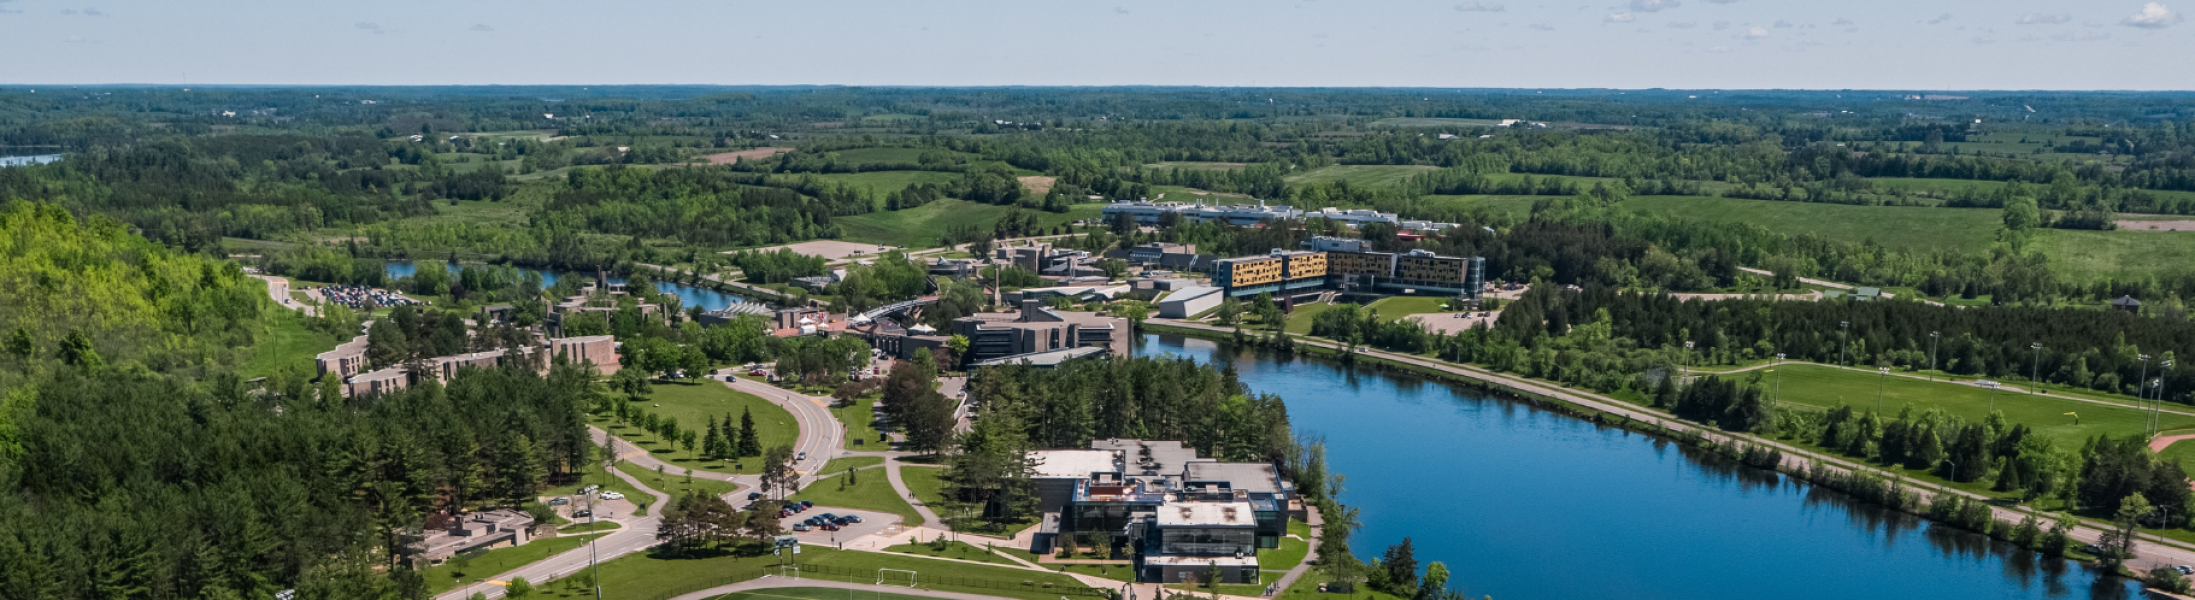 View of Otonabee river and campus from above